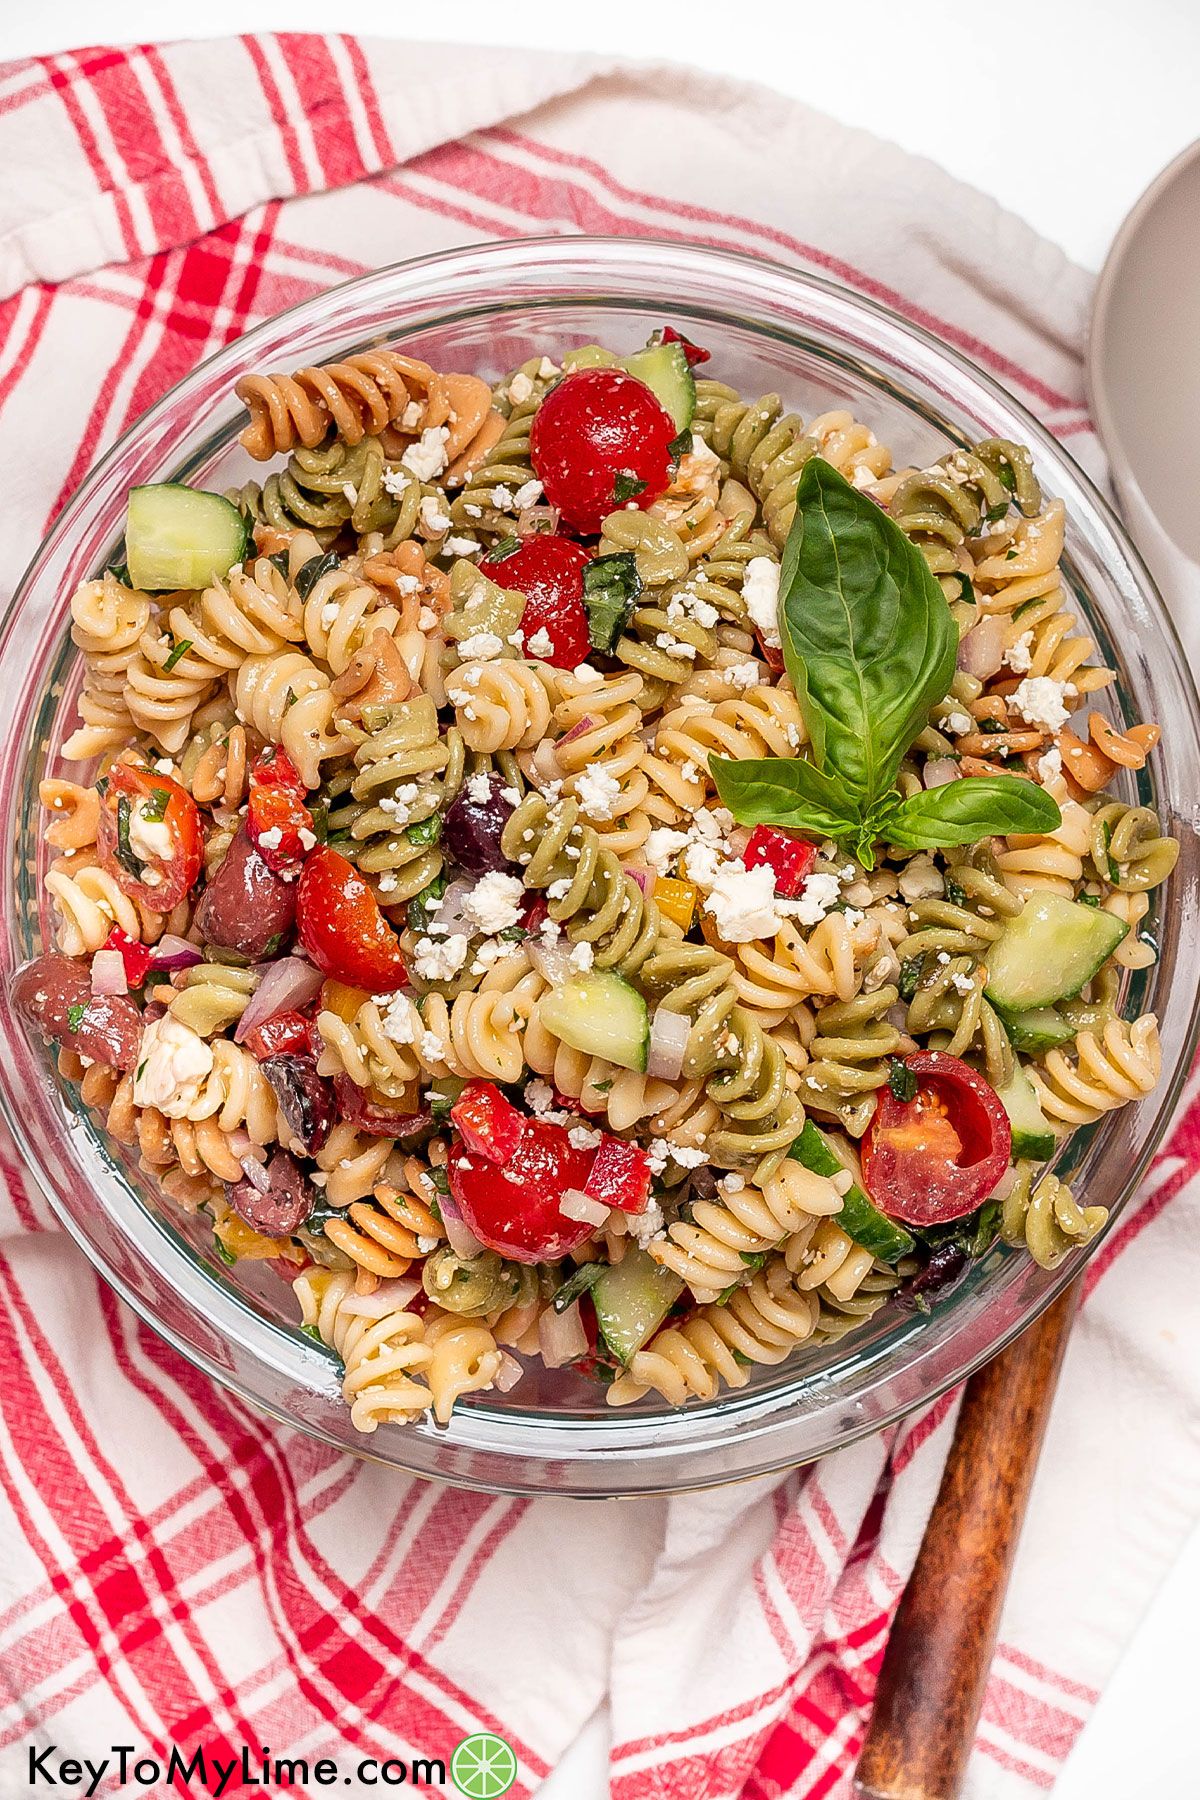 An overhead image of a large bowl filled with freshly made rotini pasta salad on top of a red napkin.